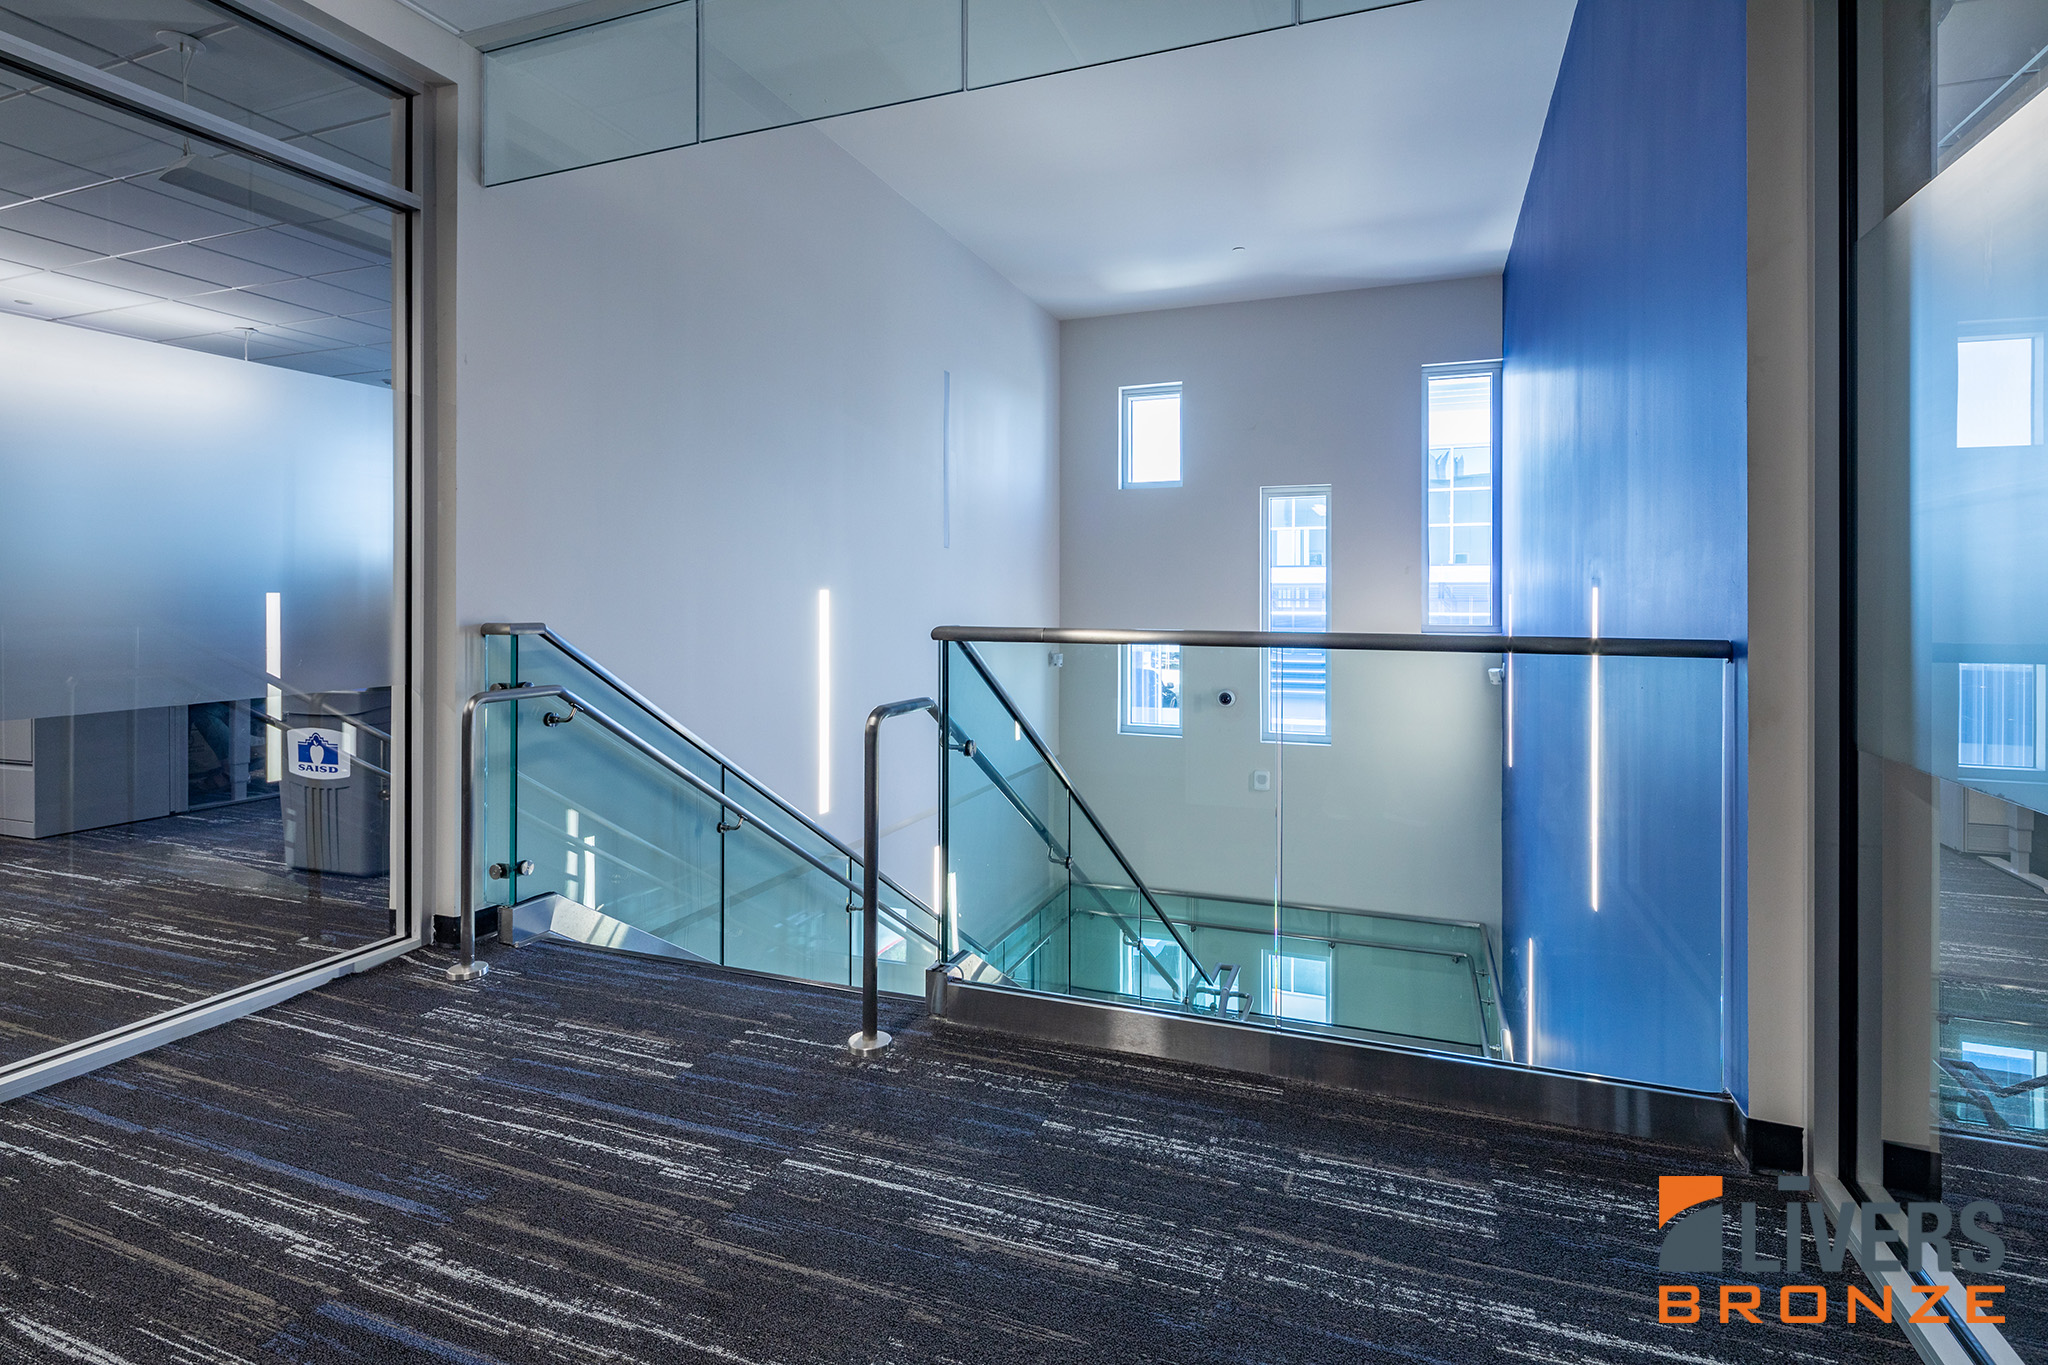 Livers Bronze Struct-U-Rail Commercial Glass Railing with laminated glass installed in San Antonio Independent School District Central Office Building is Made in the USA